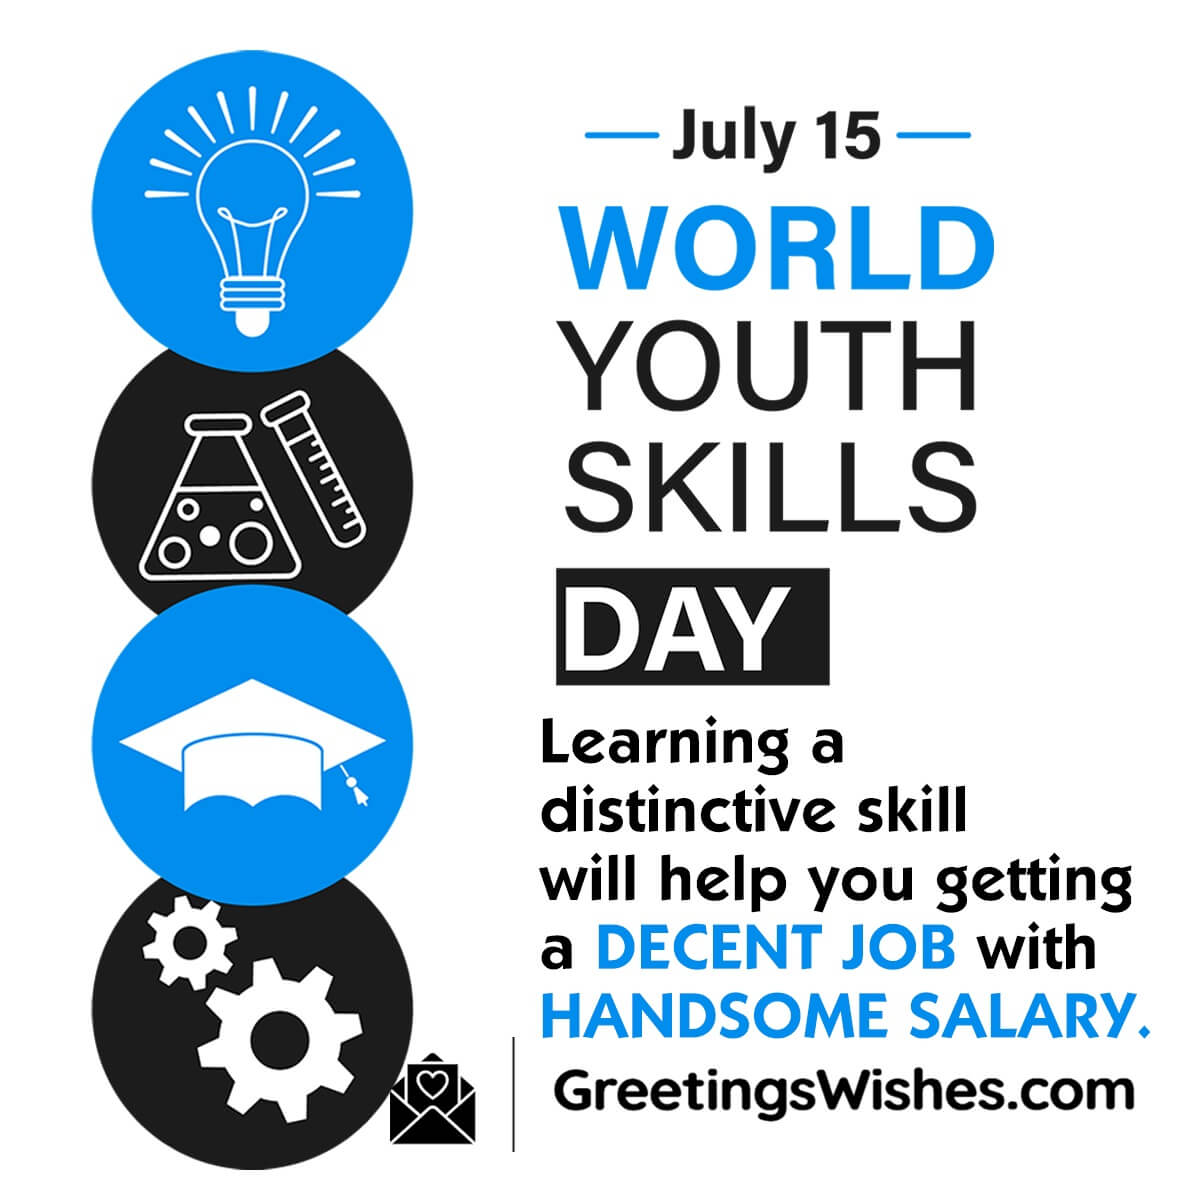 World Youth Skills Day Messages